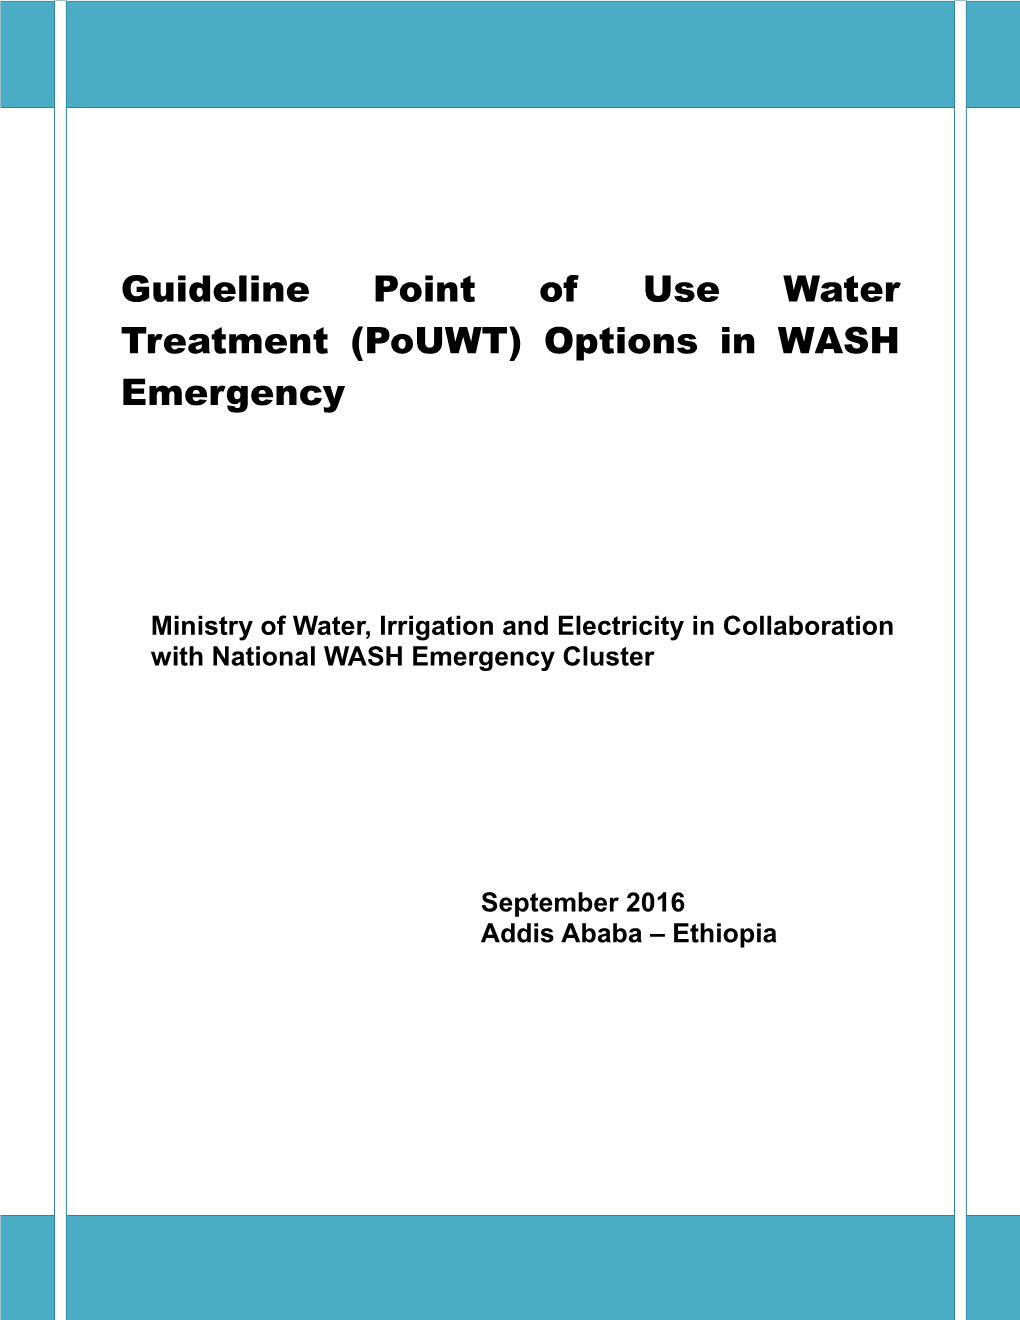 Guideline for Point of Use Water Treatment (Pouwt) Options in WASH Emergency